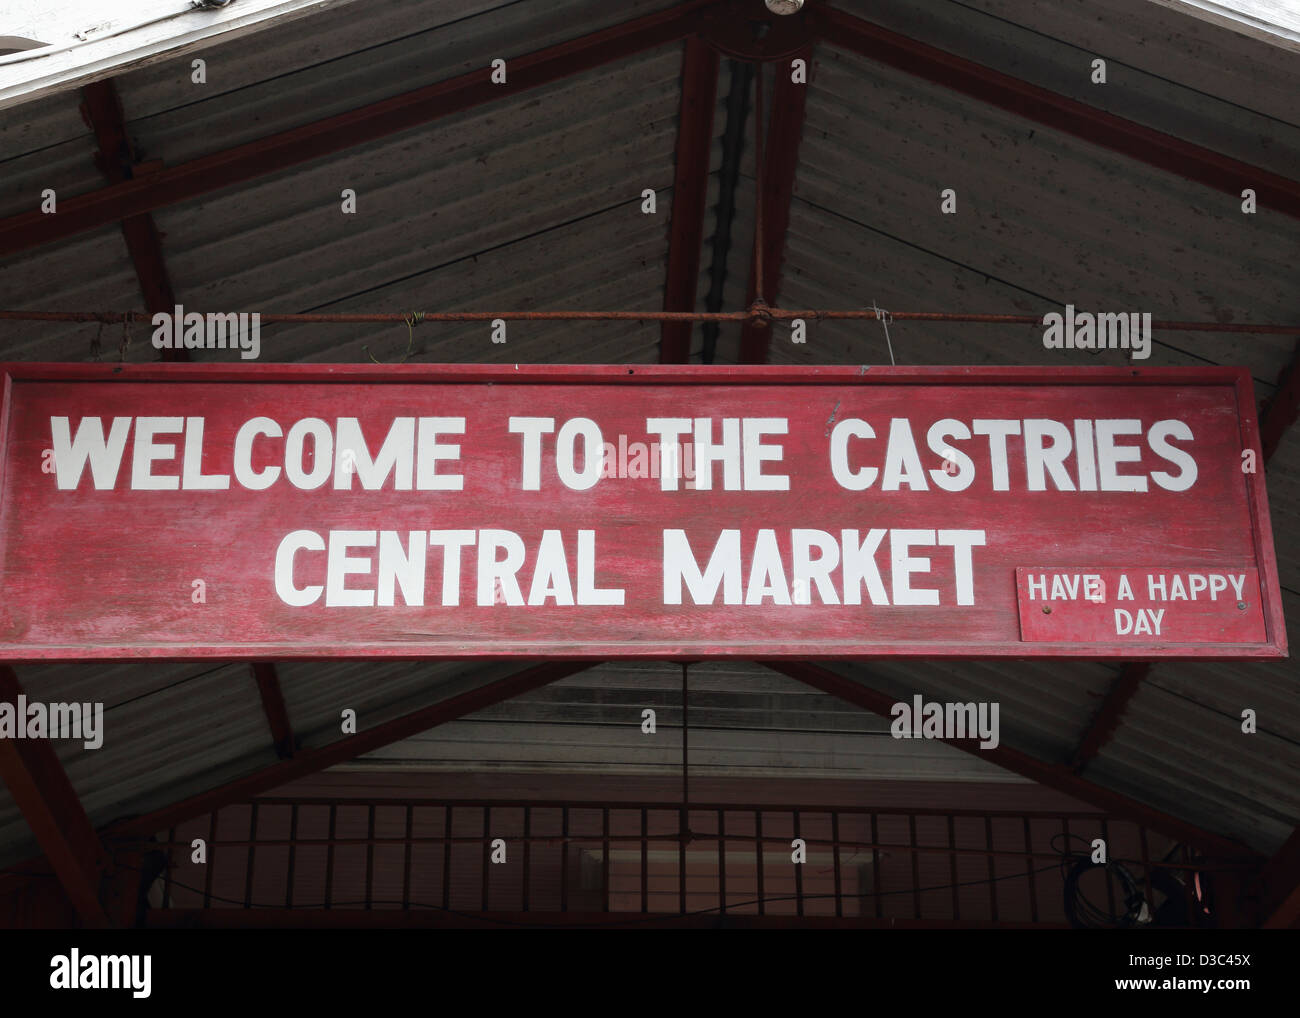 CENTRAL MARKET, CASTRIES, ST.LUCIA Stock Photo